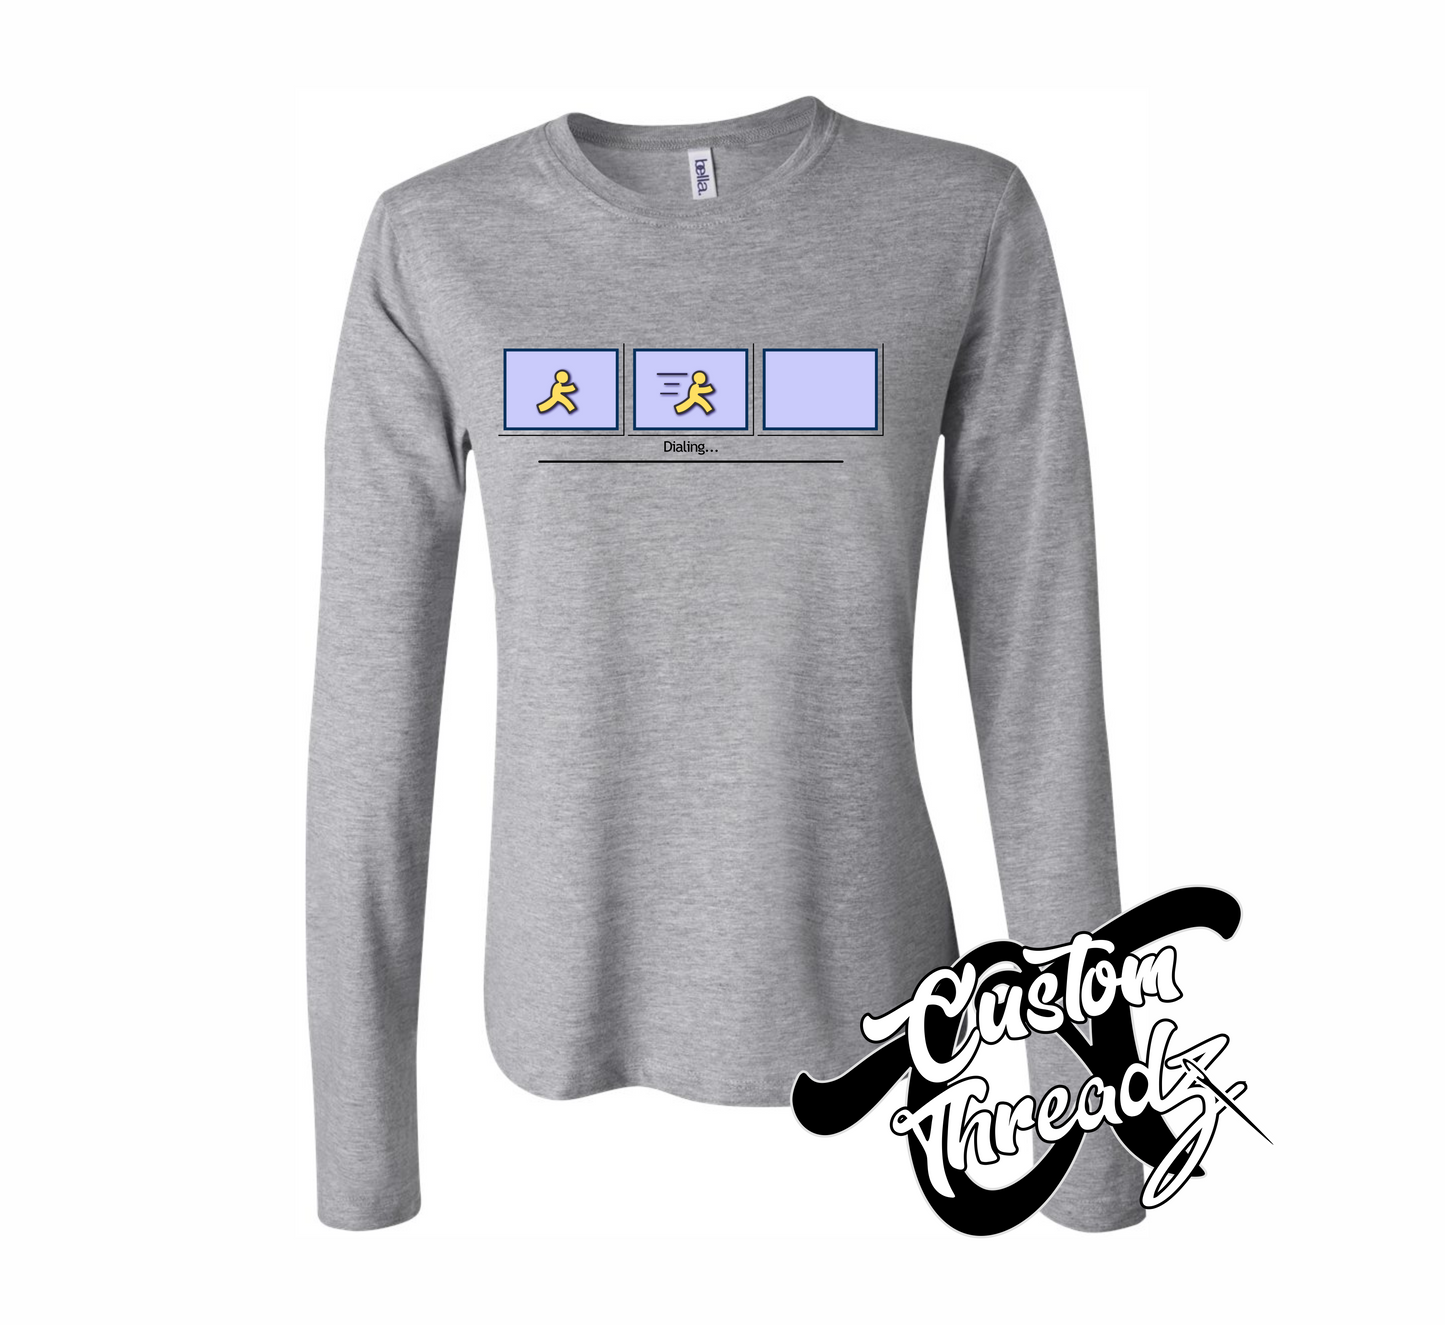 athletic heather grey womens long sleeve tee with AOL dial up DTG printed design